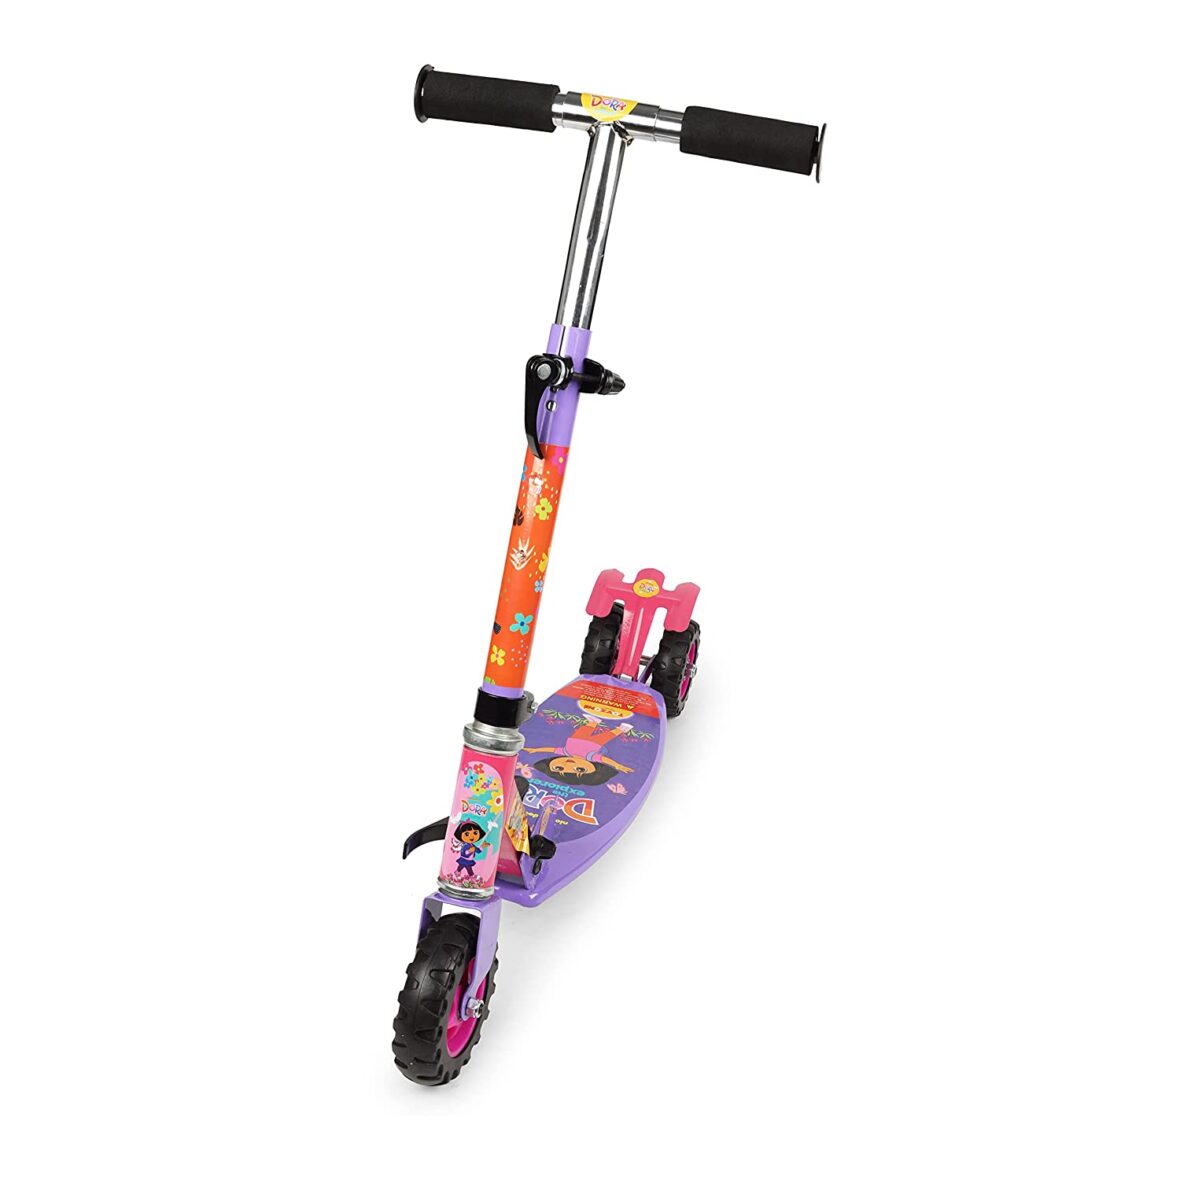 Toyzone Dora Scooter Oval-66156 | Kids Skate |3 Wheel Kids Scooter | Smart Kick Scooter | Adjustable Height and Rear Brake | Foldable Scooter | for Kids Age 6+ Years